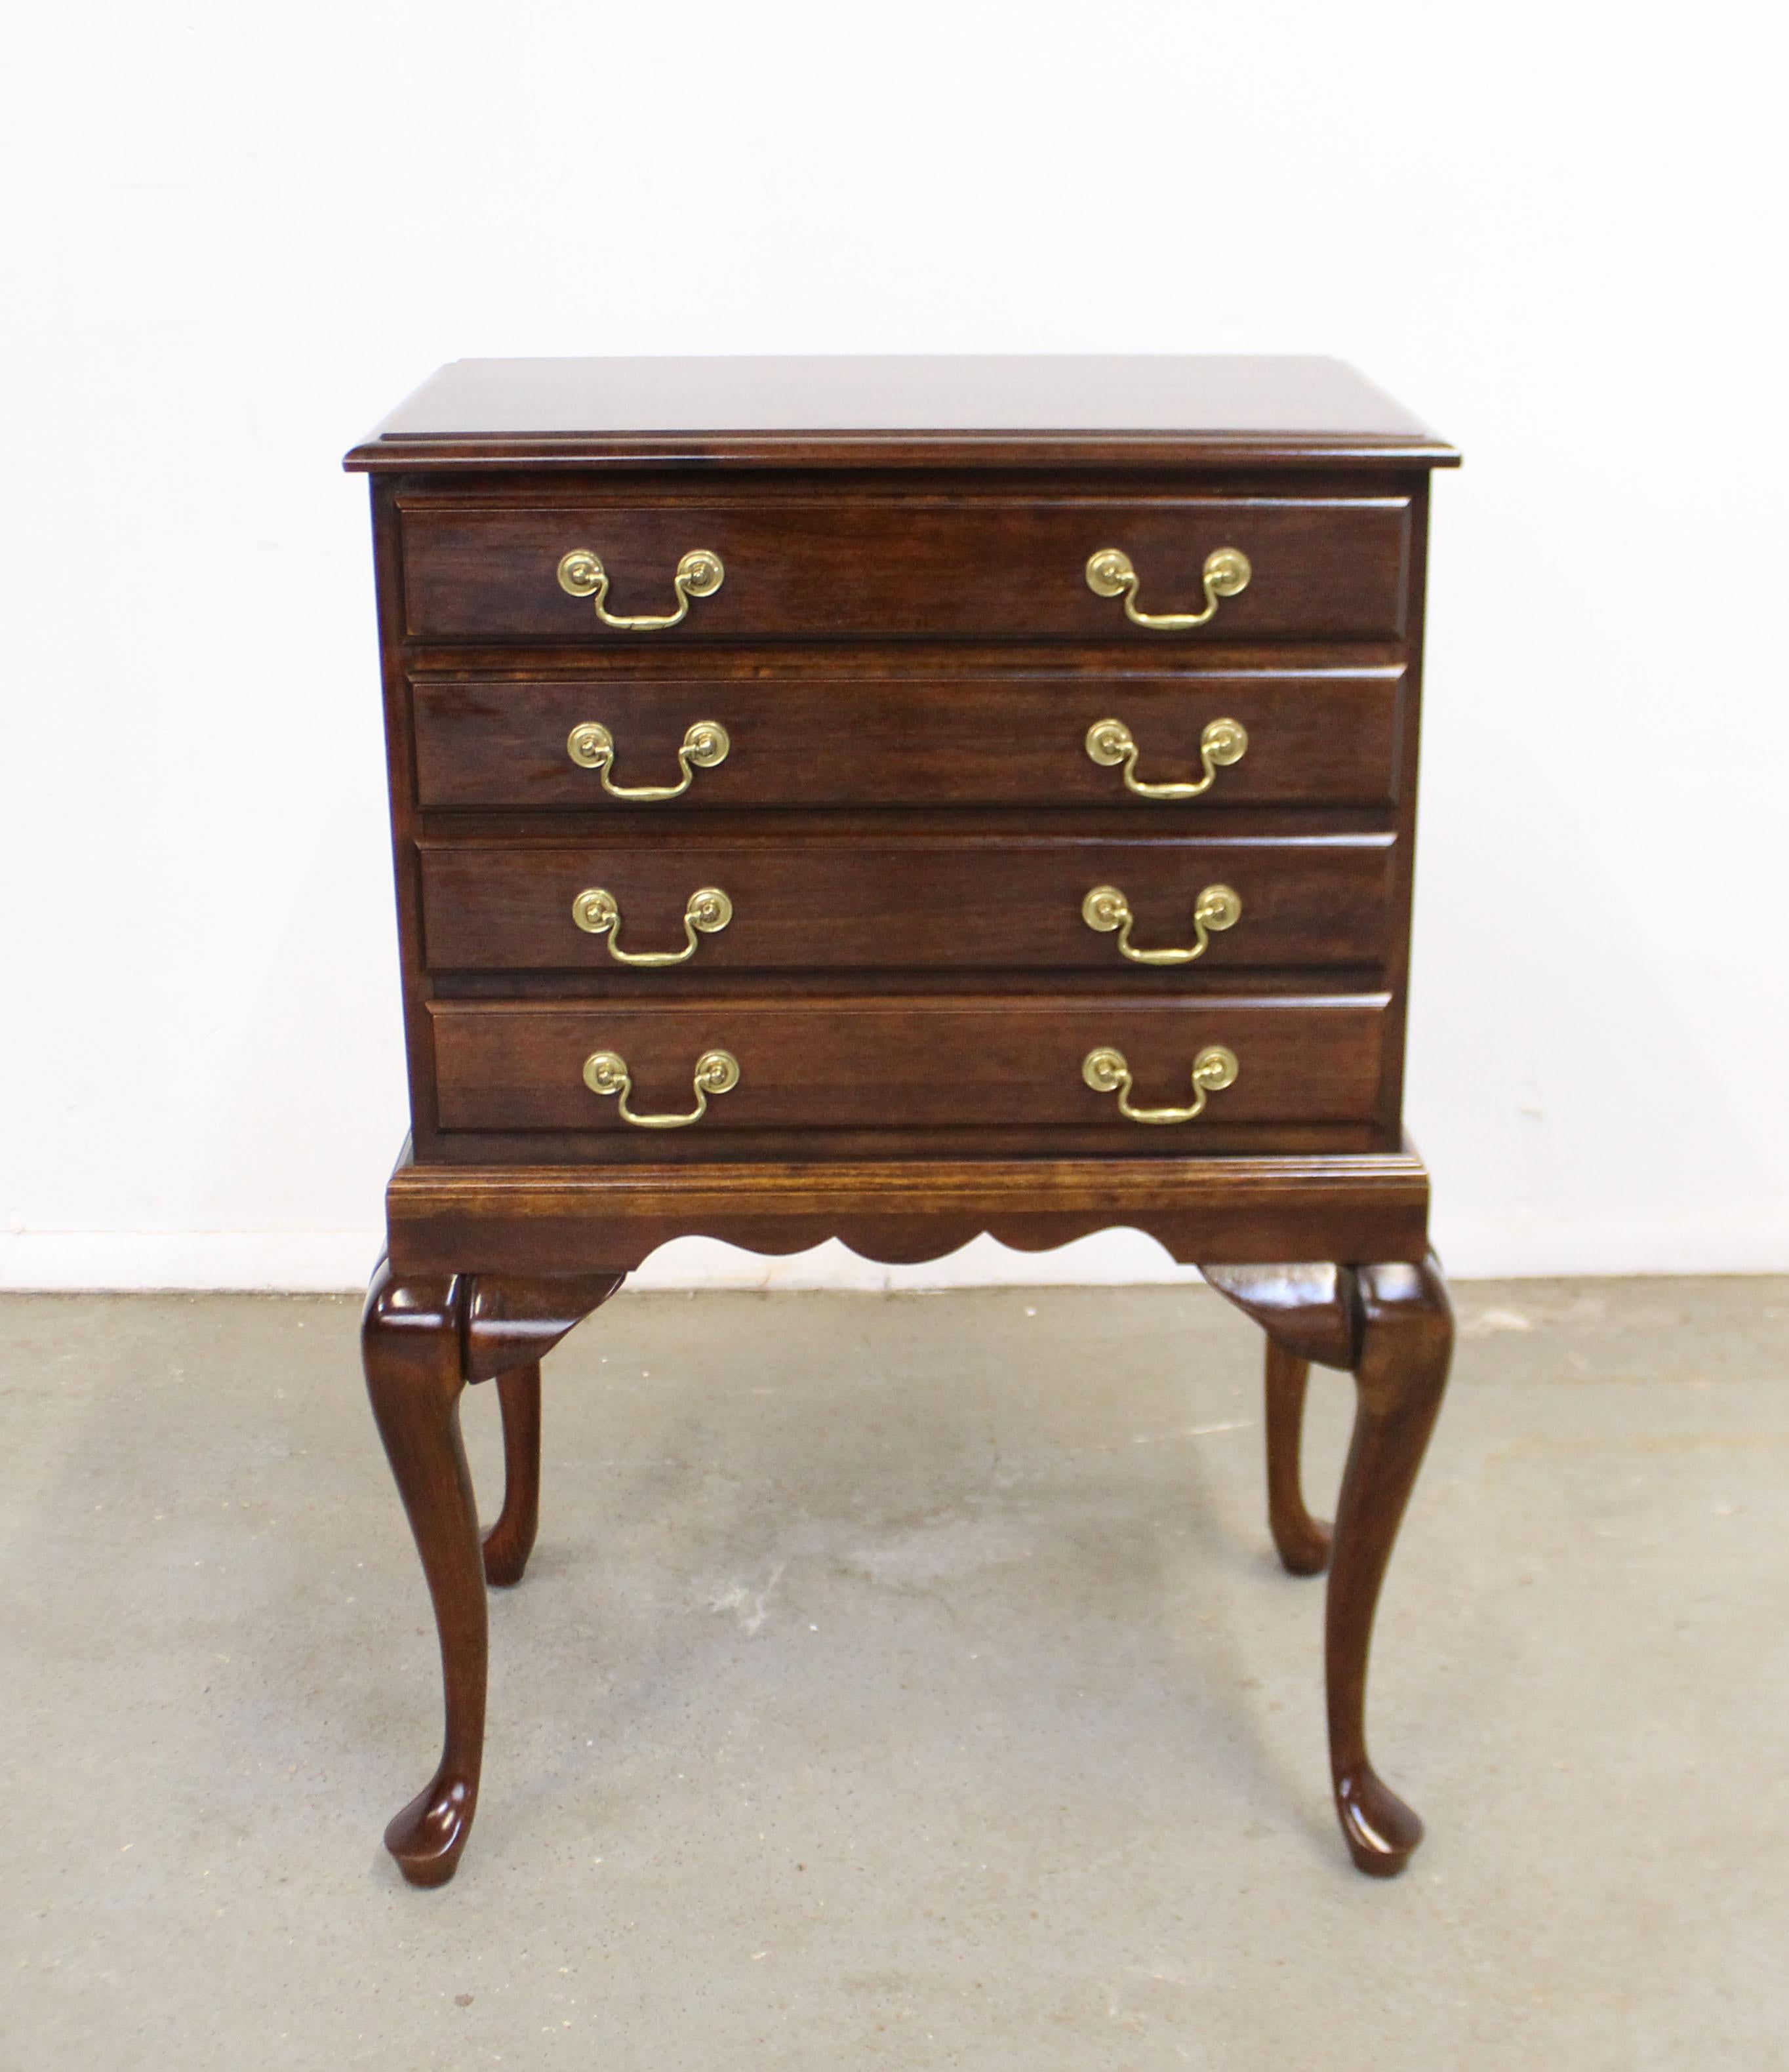 Offered is a Chippendale cherry silver chest attributed to Statton 'Old Town'. Features dovetailed drawers with gold tone pulls and a solid cherry back. It has 4 drawers that include inner dividers for silverware. It is in good condition, shows